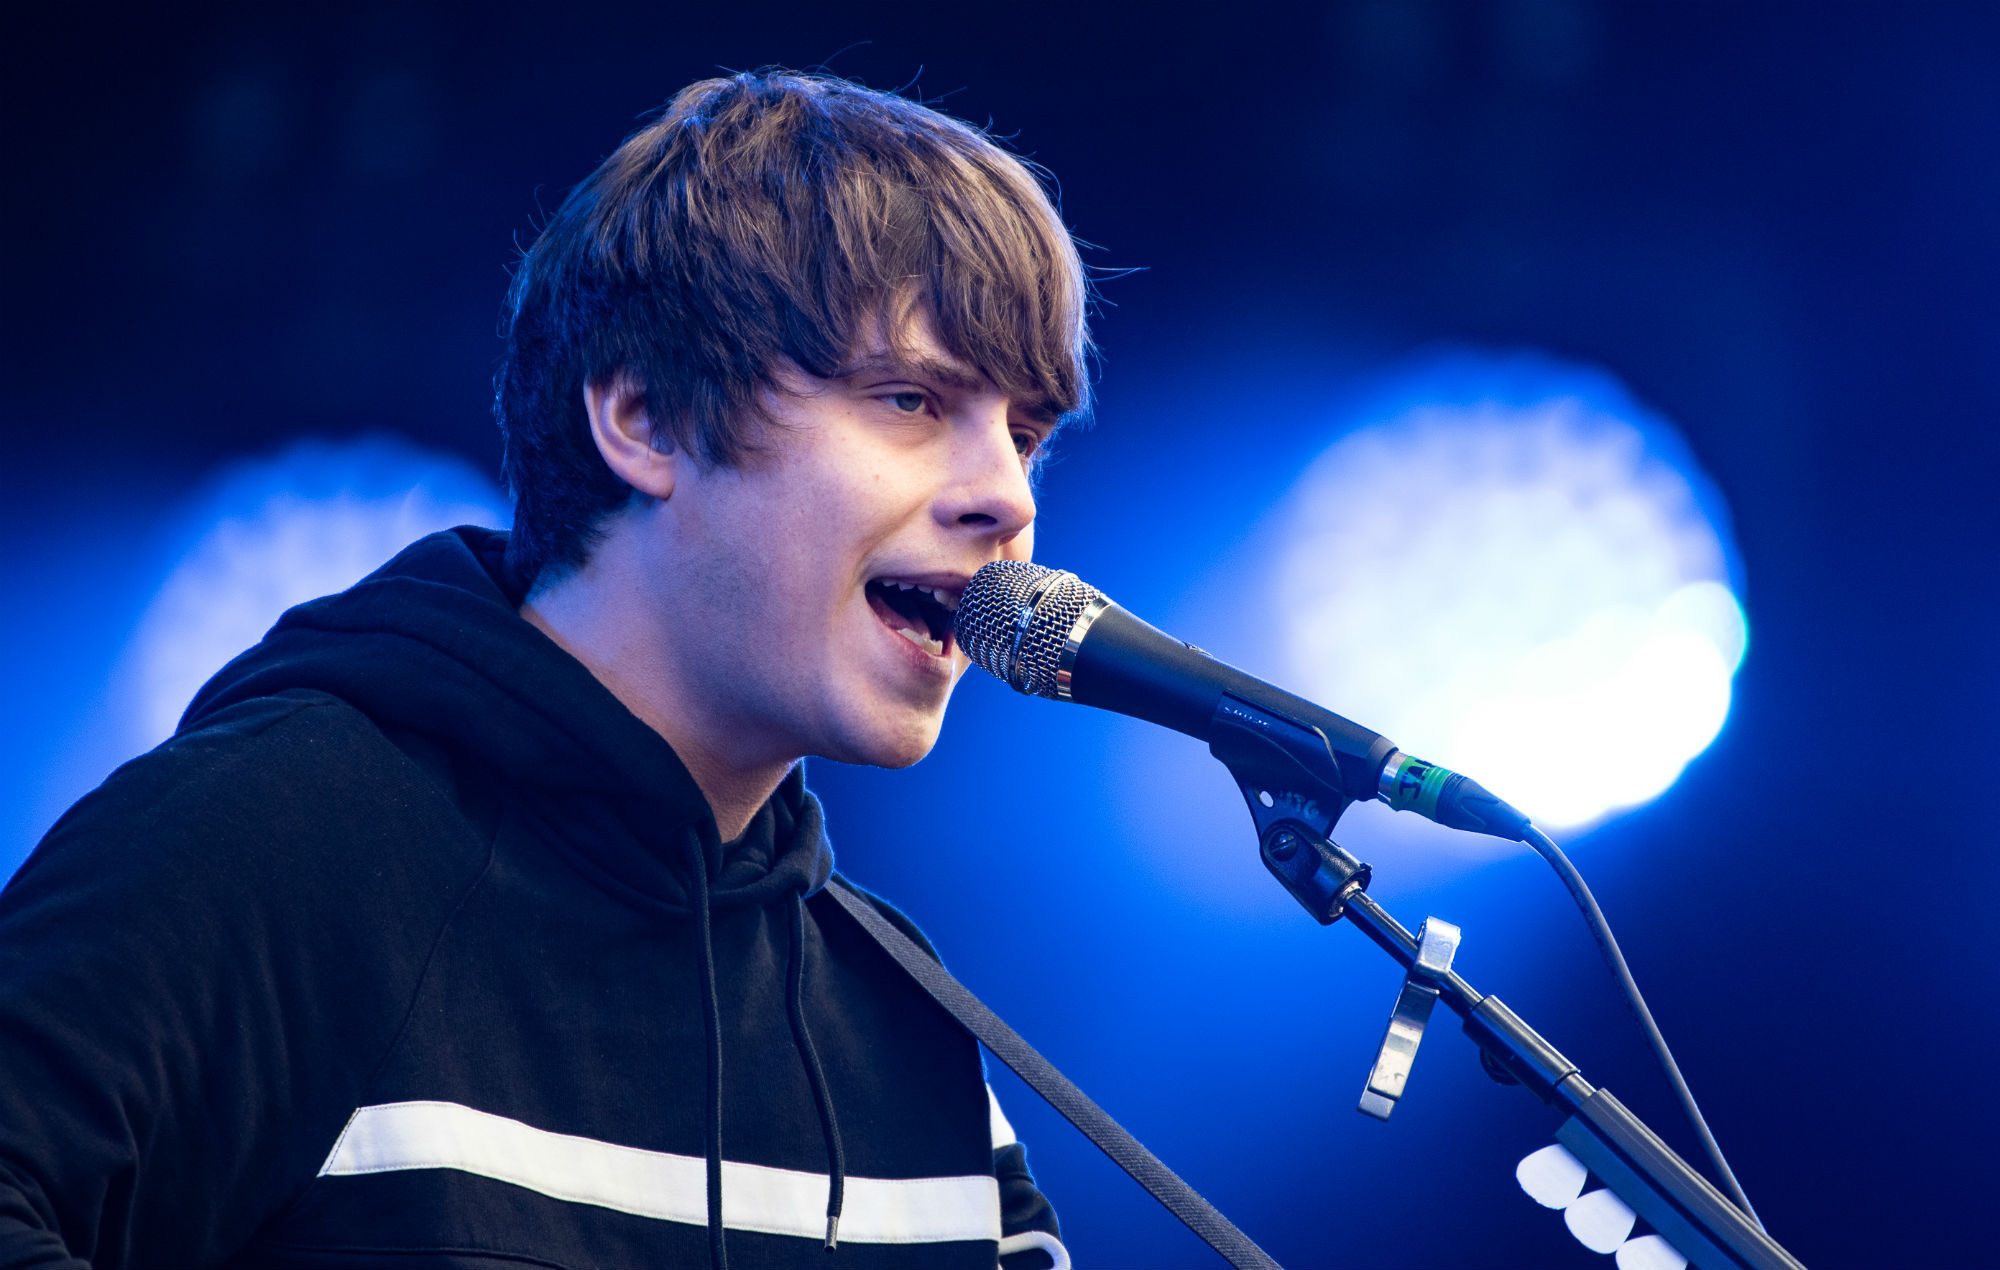 Jake Bugg, Acoustic performance, Blues-inspired music, Catchy melodies, 2000x1270 HD Desktop